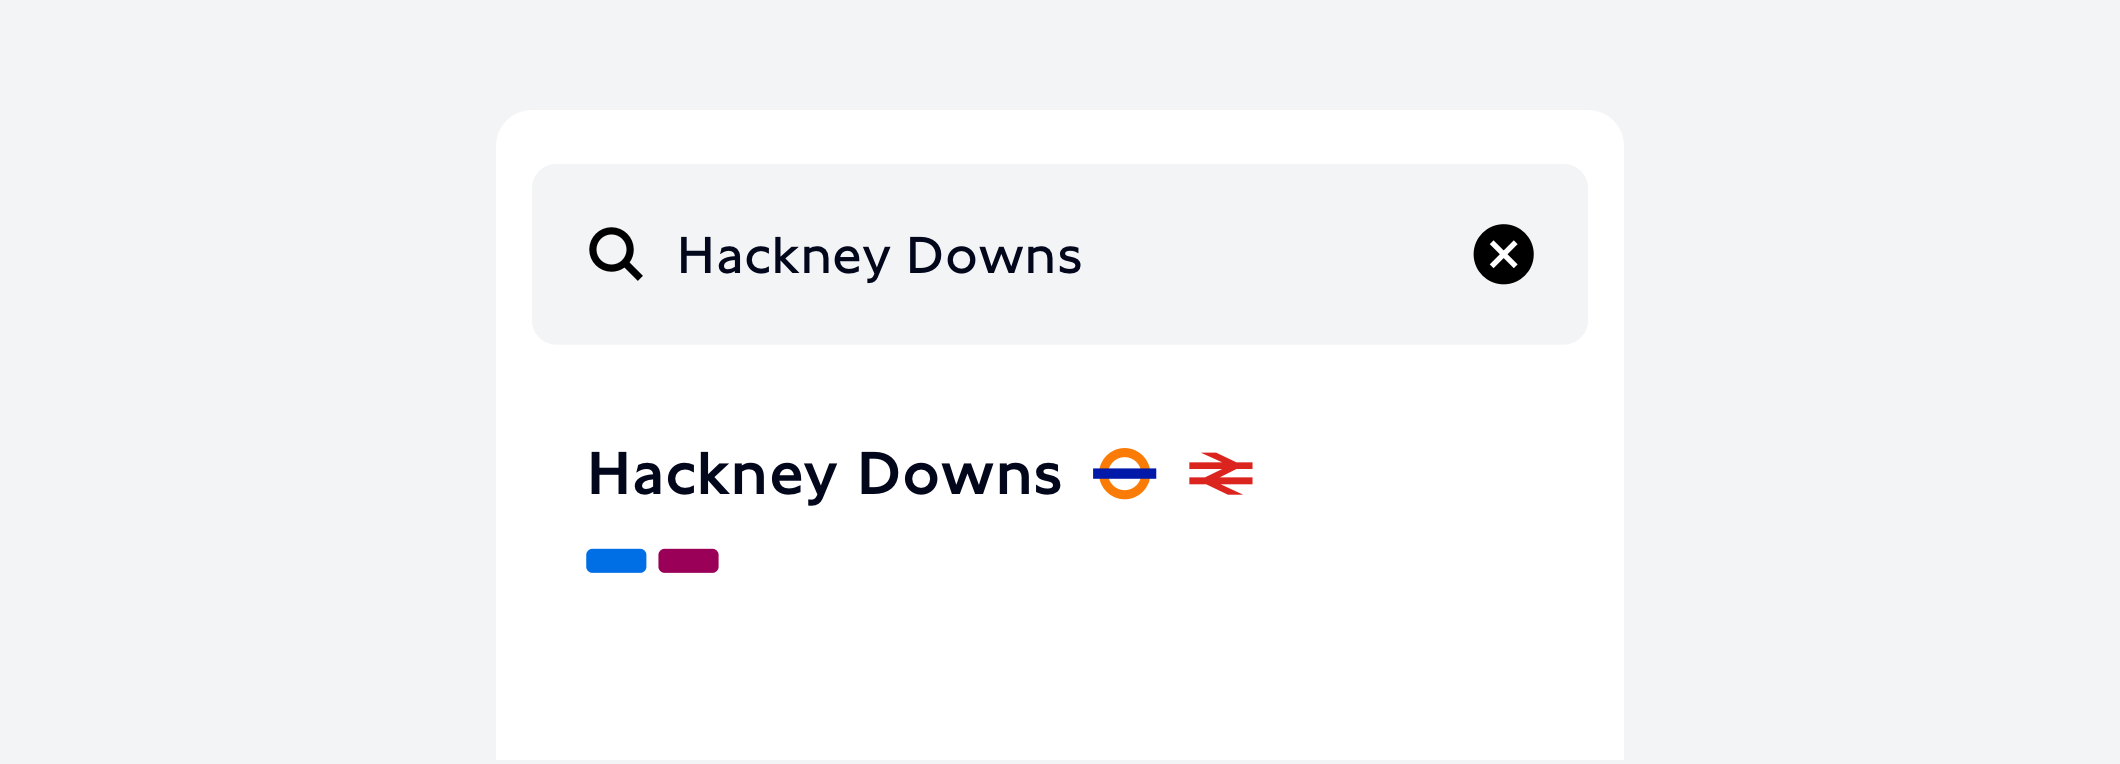 An example of UI design for a search result for Hackney Downs station. The result is displayed underneath a search field containing an icon of a magnifying glass and the word “Hackney Downs”. The search result includes the name of the station, the London Overground icon, the National Rail icon, and two round cornered rectangles in blue and purple, signifying the Mildmay and the Weaver lines.